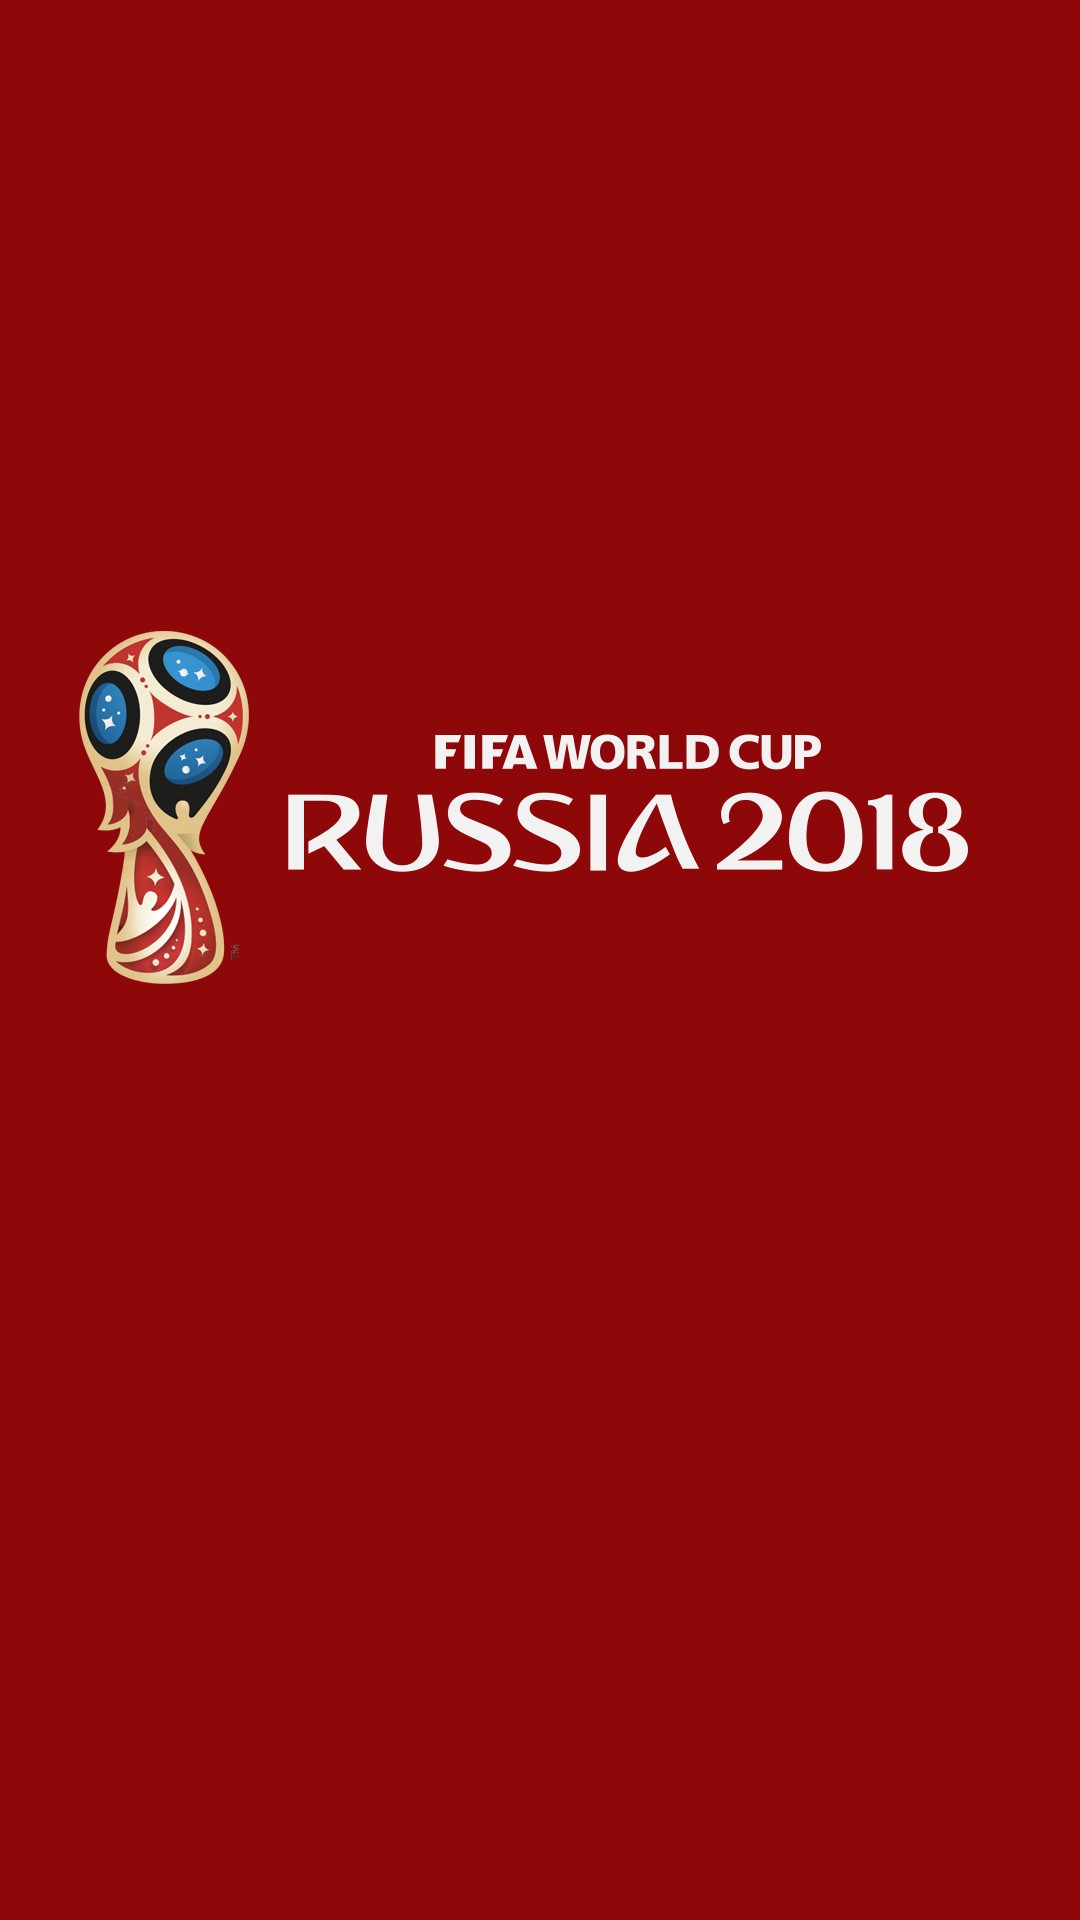 iPhone 8 Wallpaper World Cup Russia resolution 1080x1920